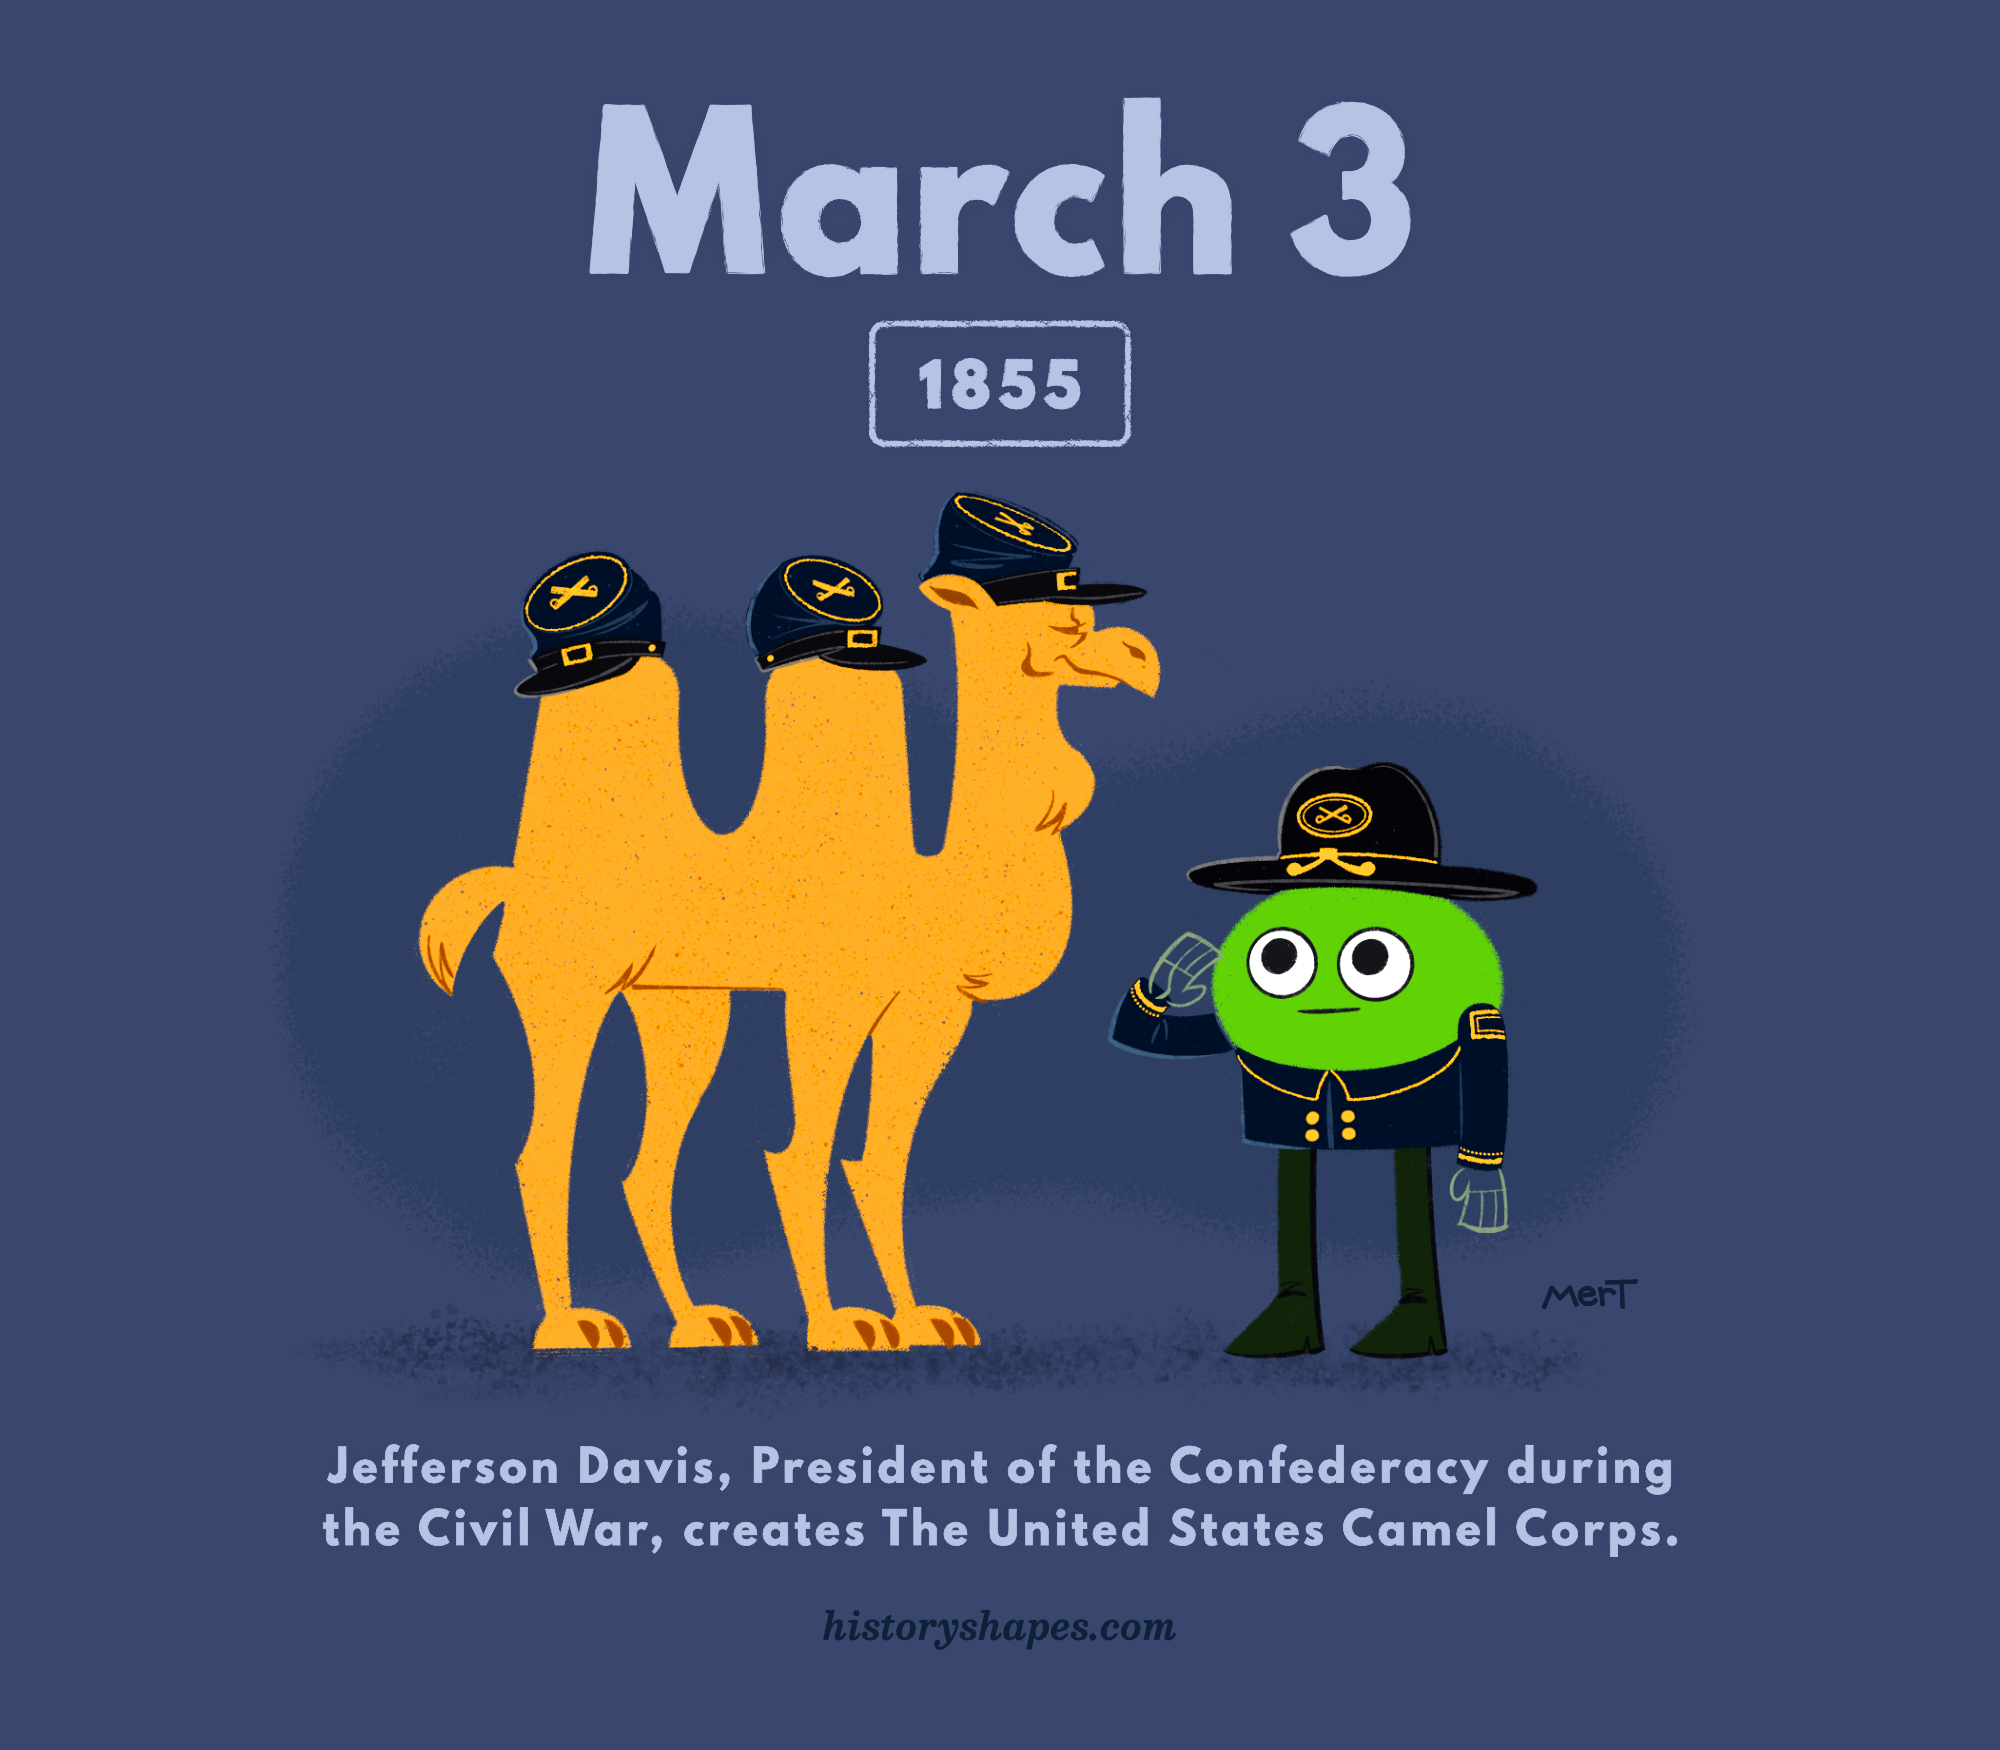 Morgan, a green oval, is dressed in 1850s military dress and salutes a camel wearing a hat on its head and one on each of two humps.